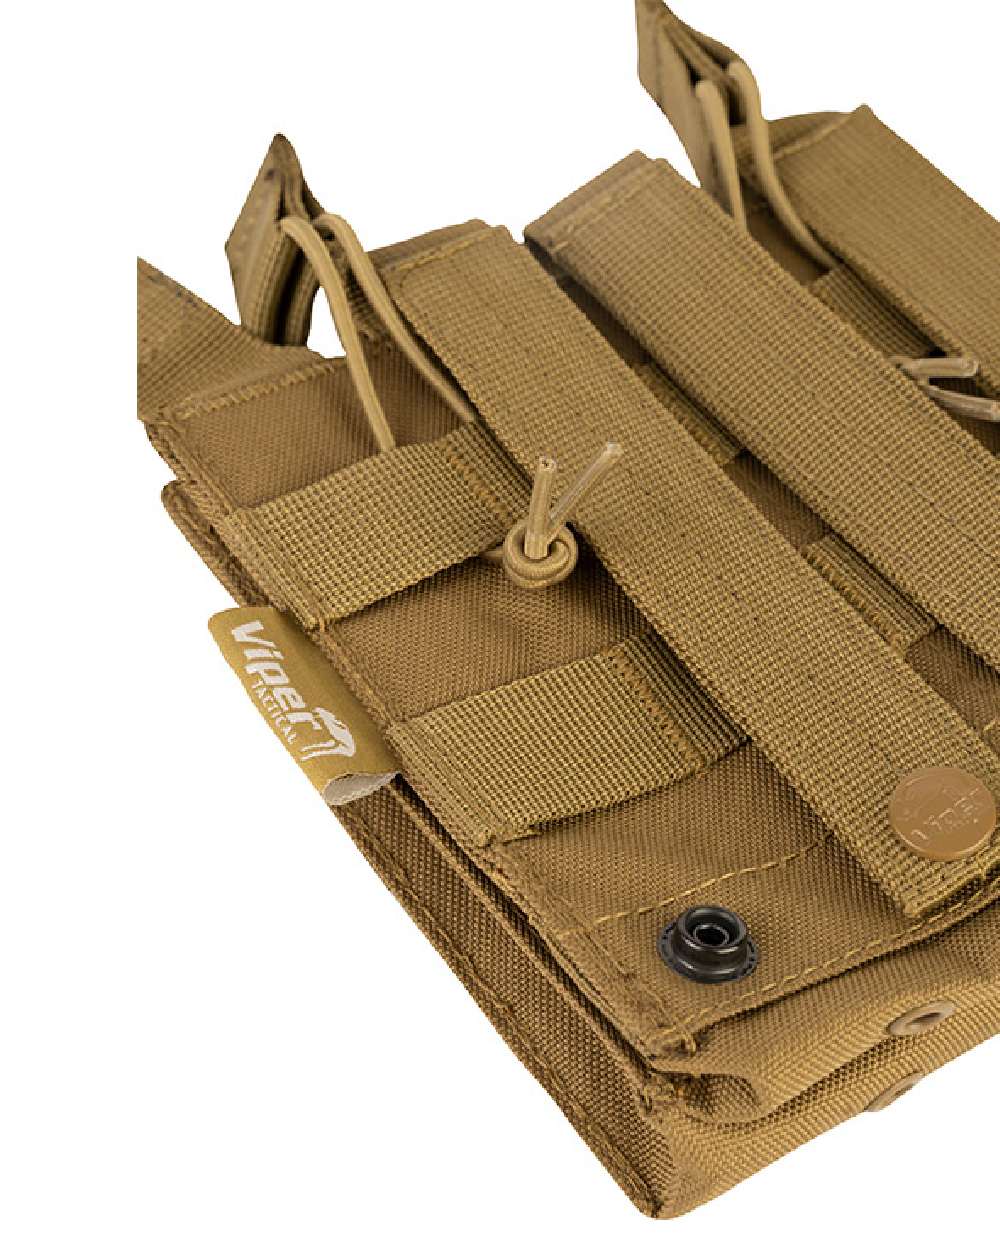 Viper Double Duo Mag Pouch in Coyote 